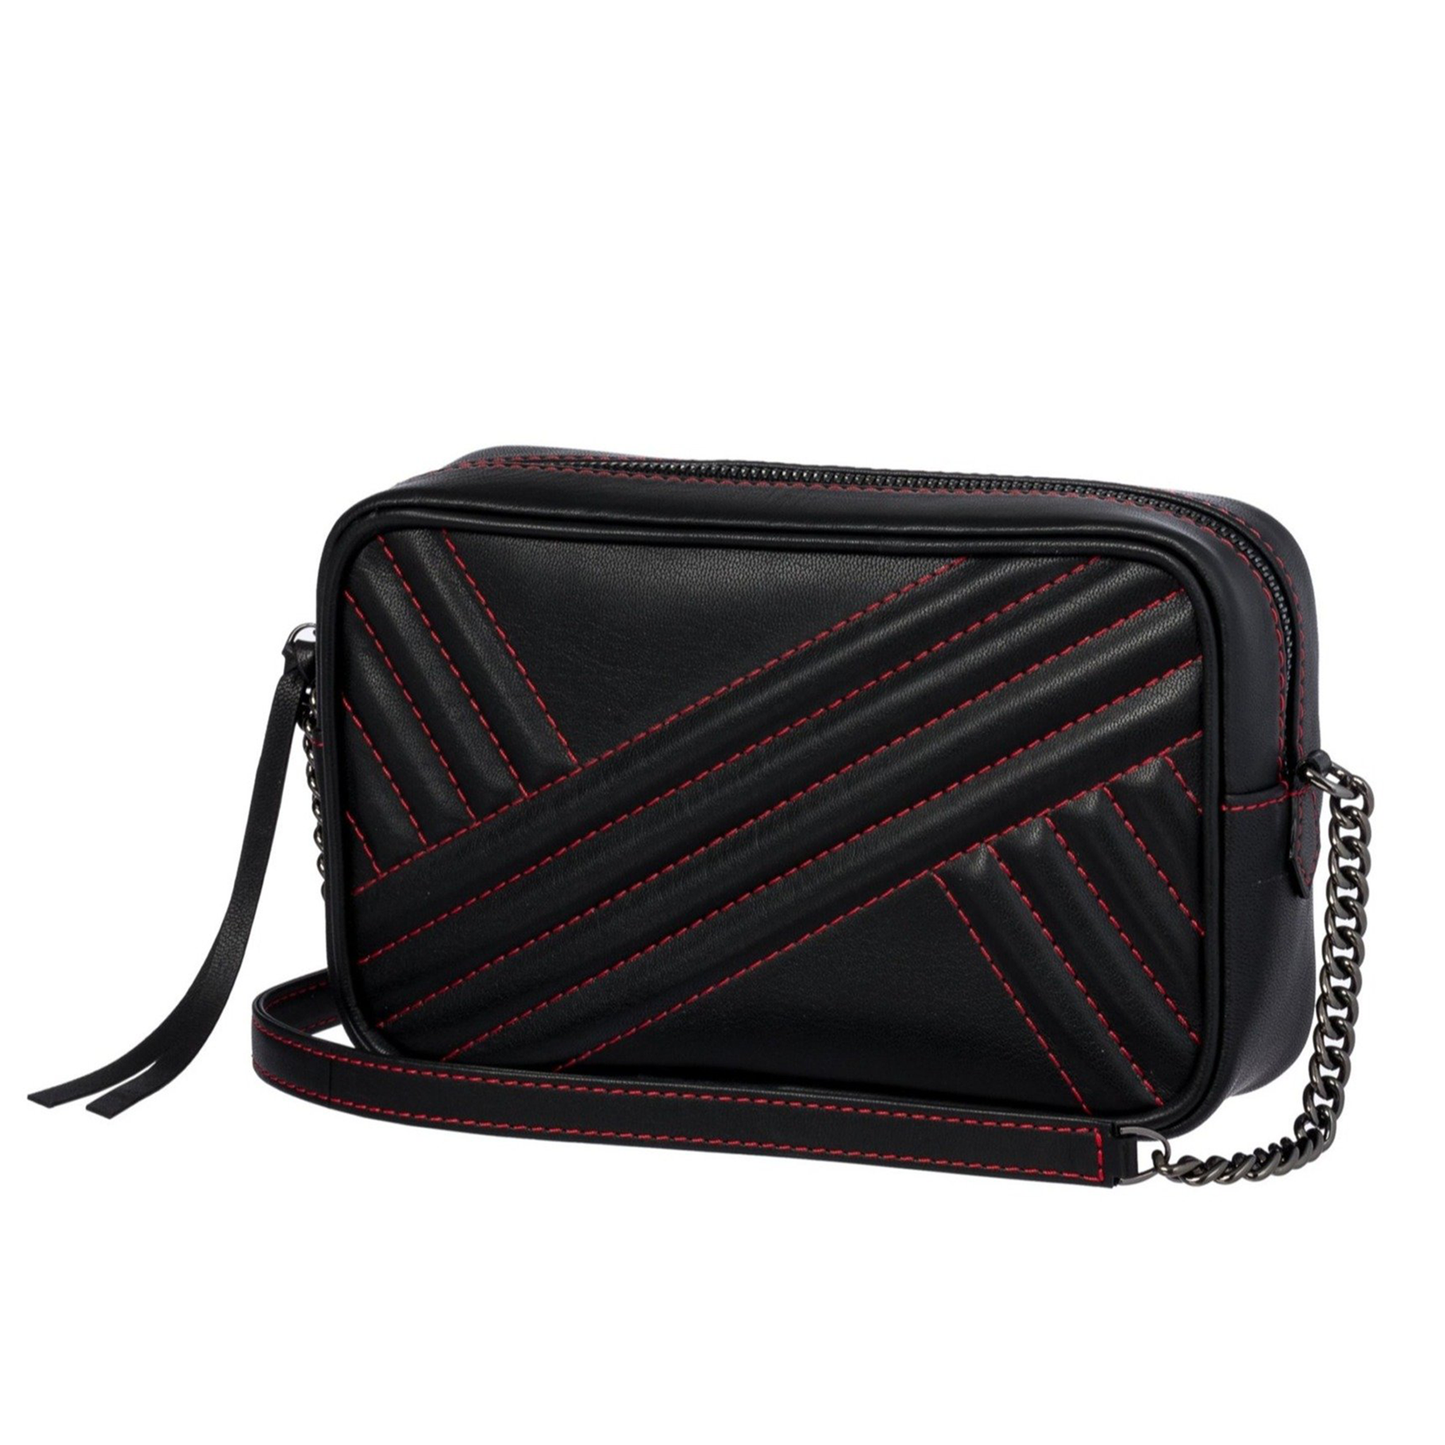 Load image into Gallery viewer, Handbag in Black Leather
